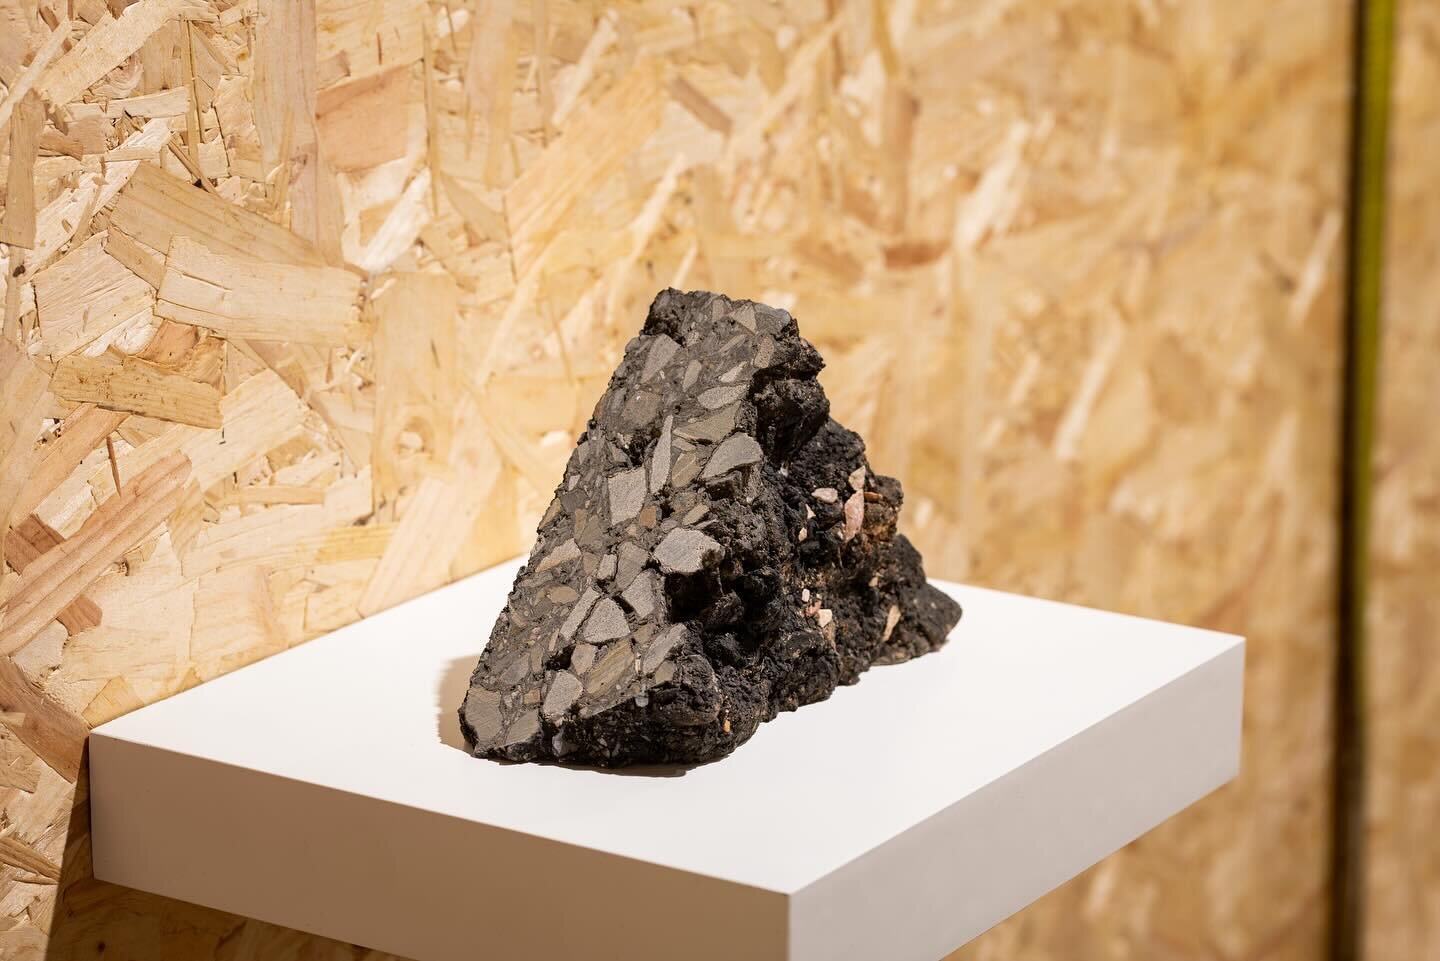 Tarmac Triangle

This chunk of tarmac has been in my possession since Jan 2021. It somehow sparks ideas and serves as a defining object for my practice. It serves as a contemporary relic of the Anthropocene. 

In my recent exhibition it was displayed